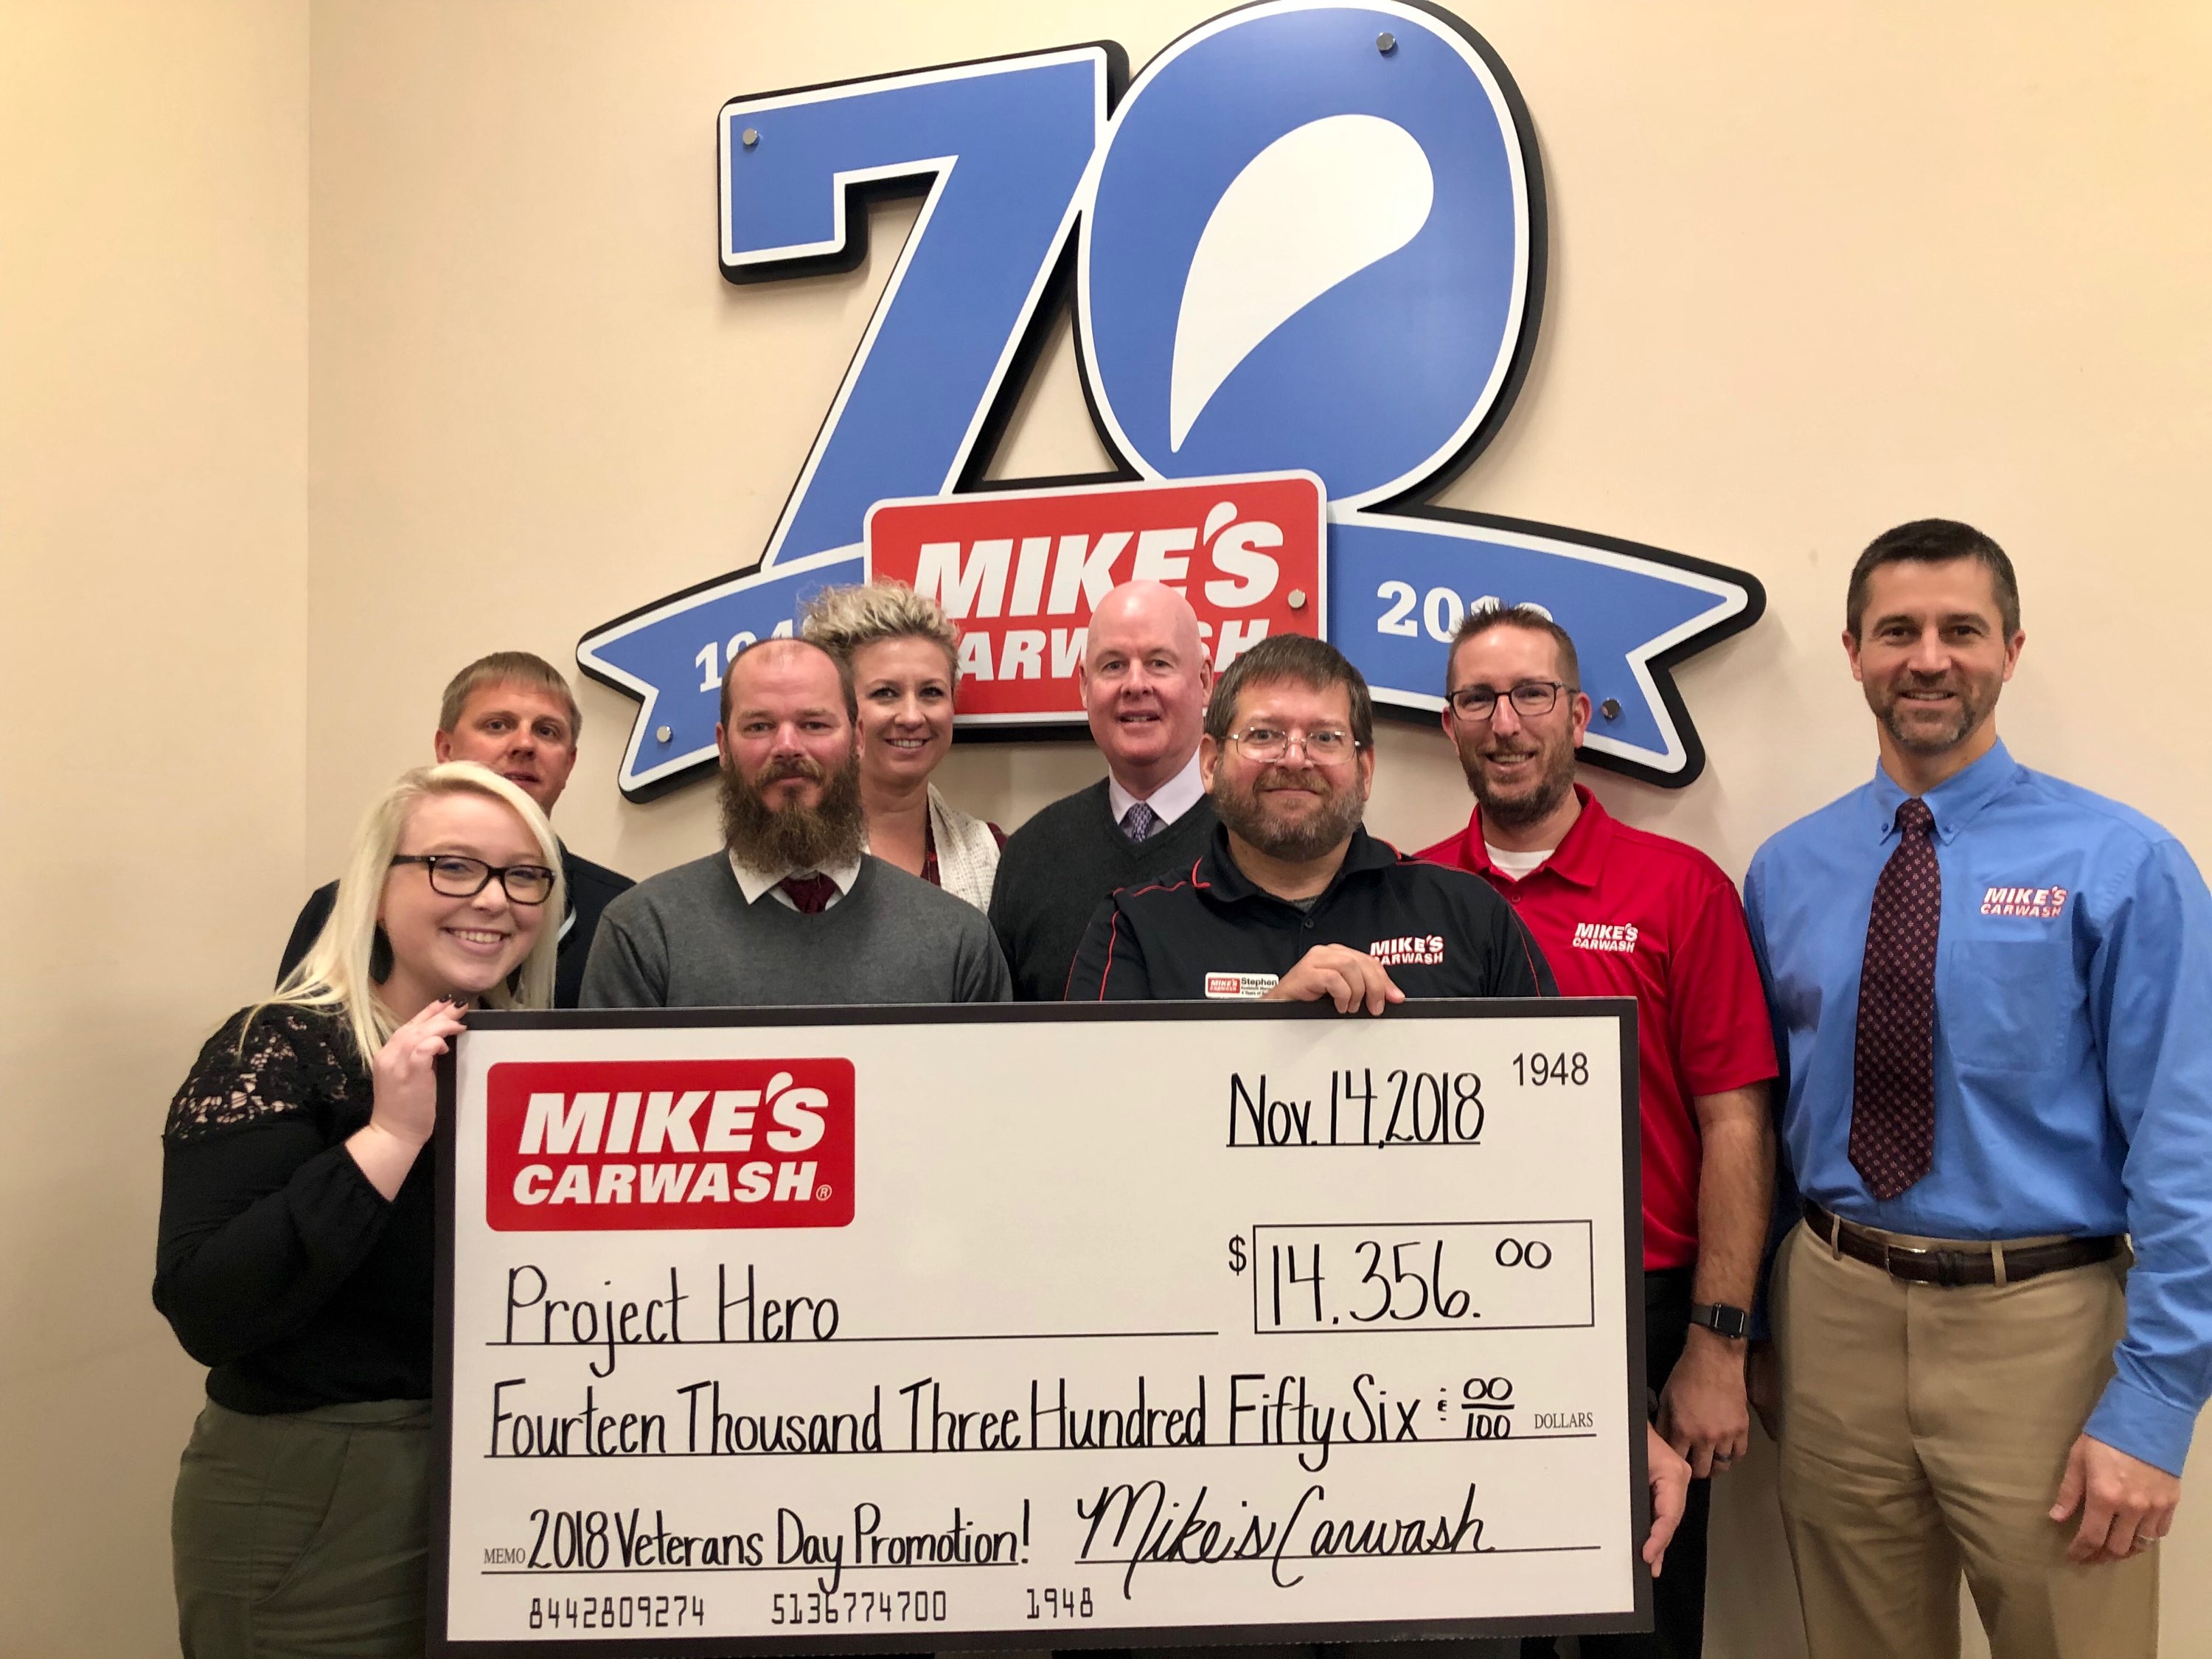 Mike's Carwash Raises $14K for Project Hero